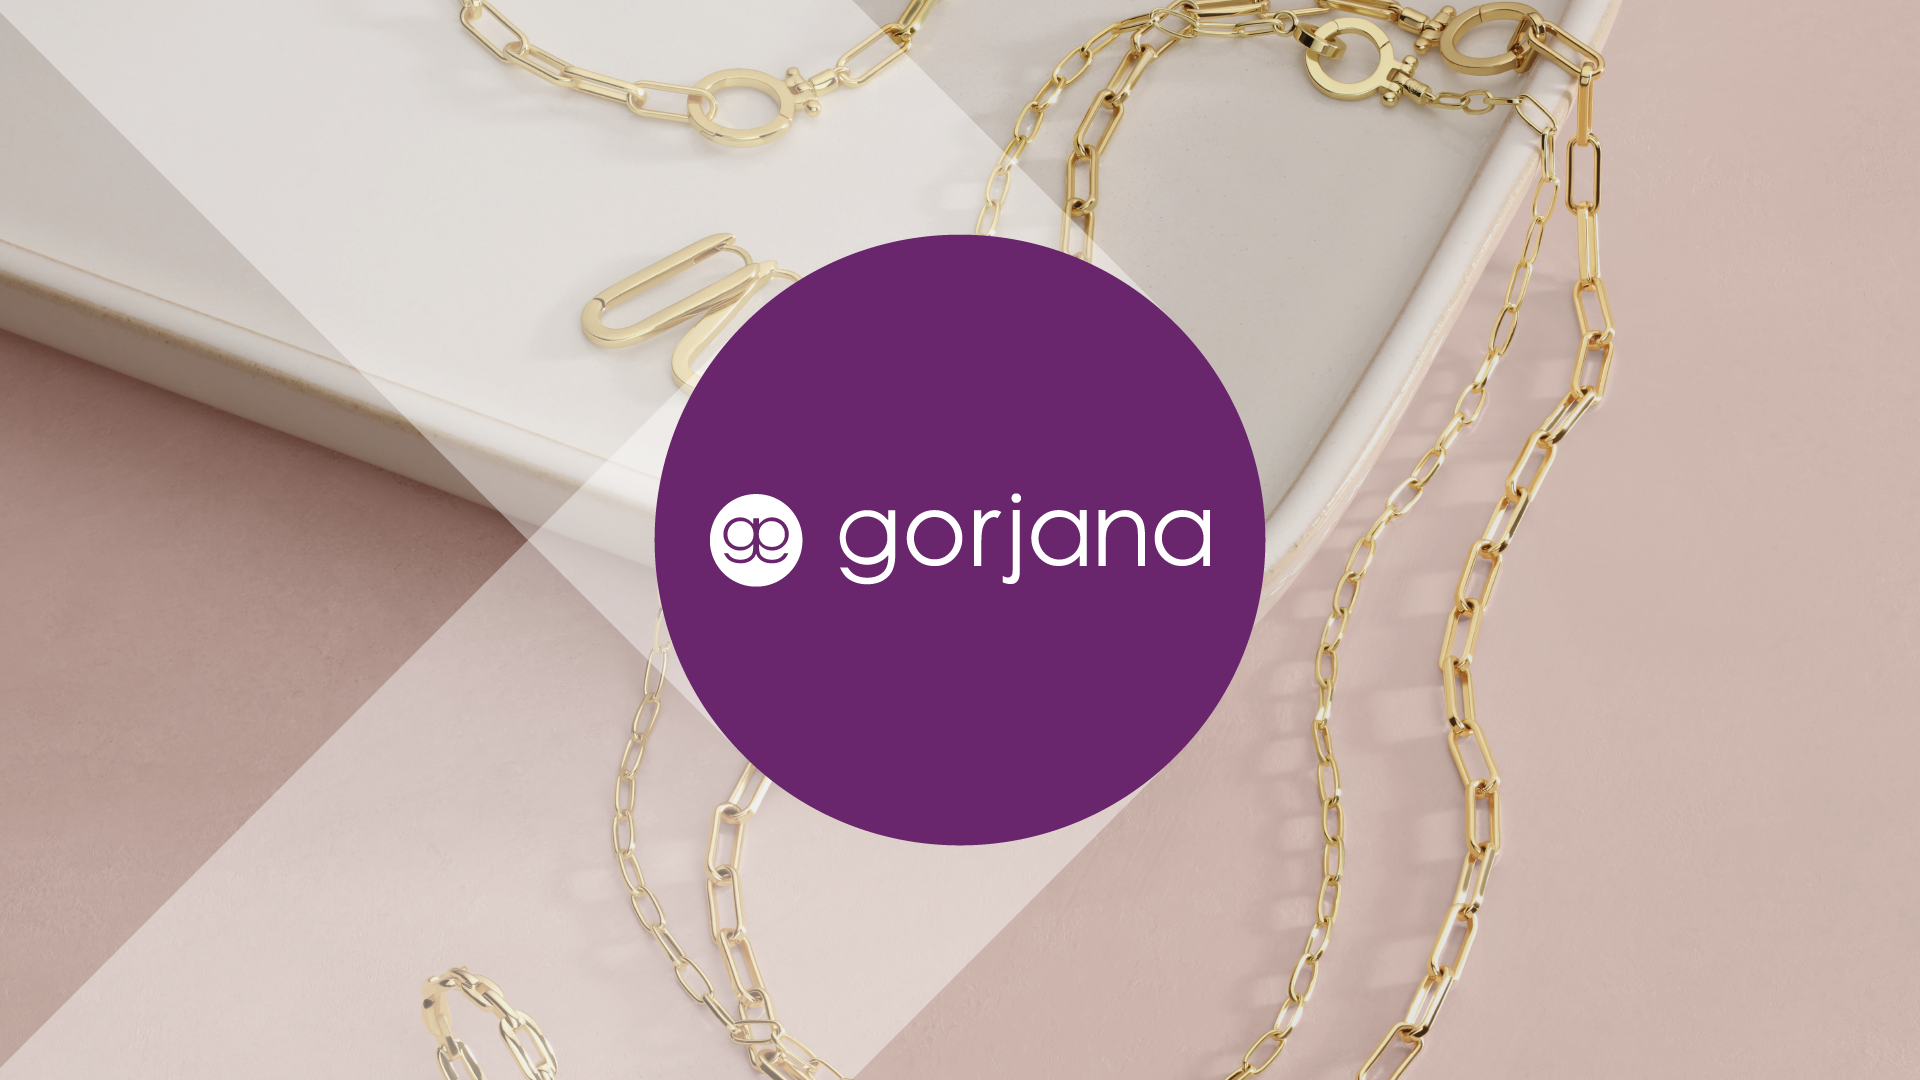 gorjana Sees 337% Increase in Conversions Year-Over-Year with Iterable SMS